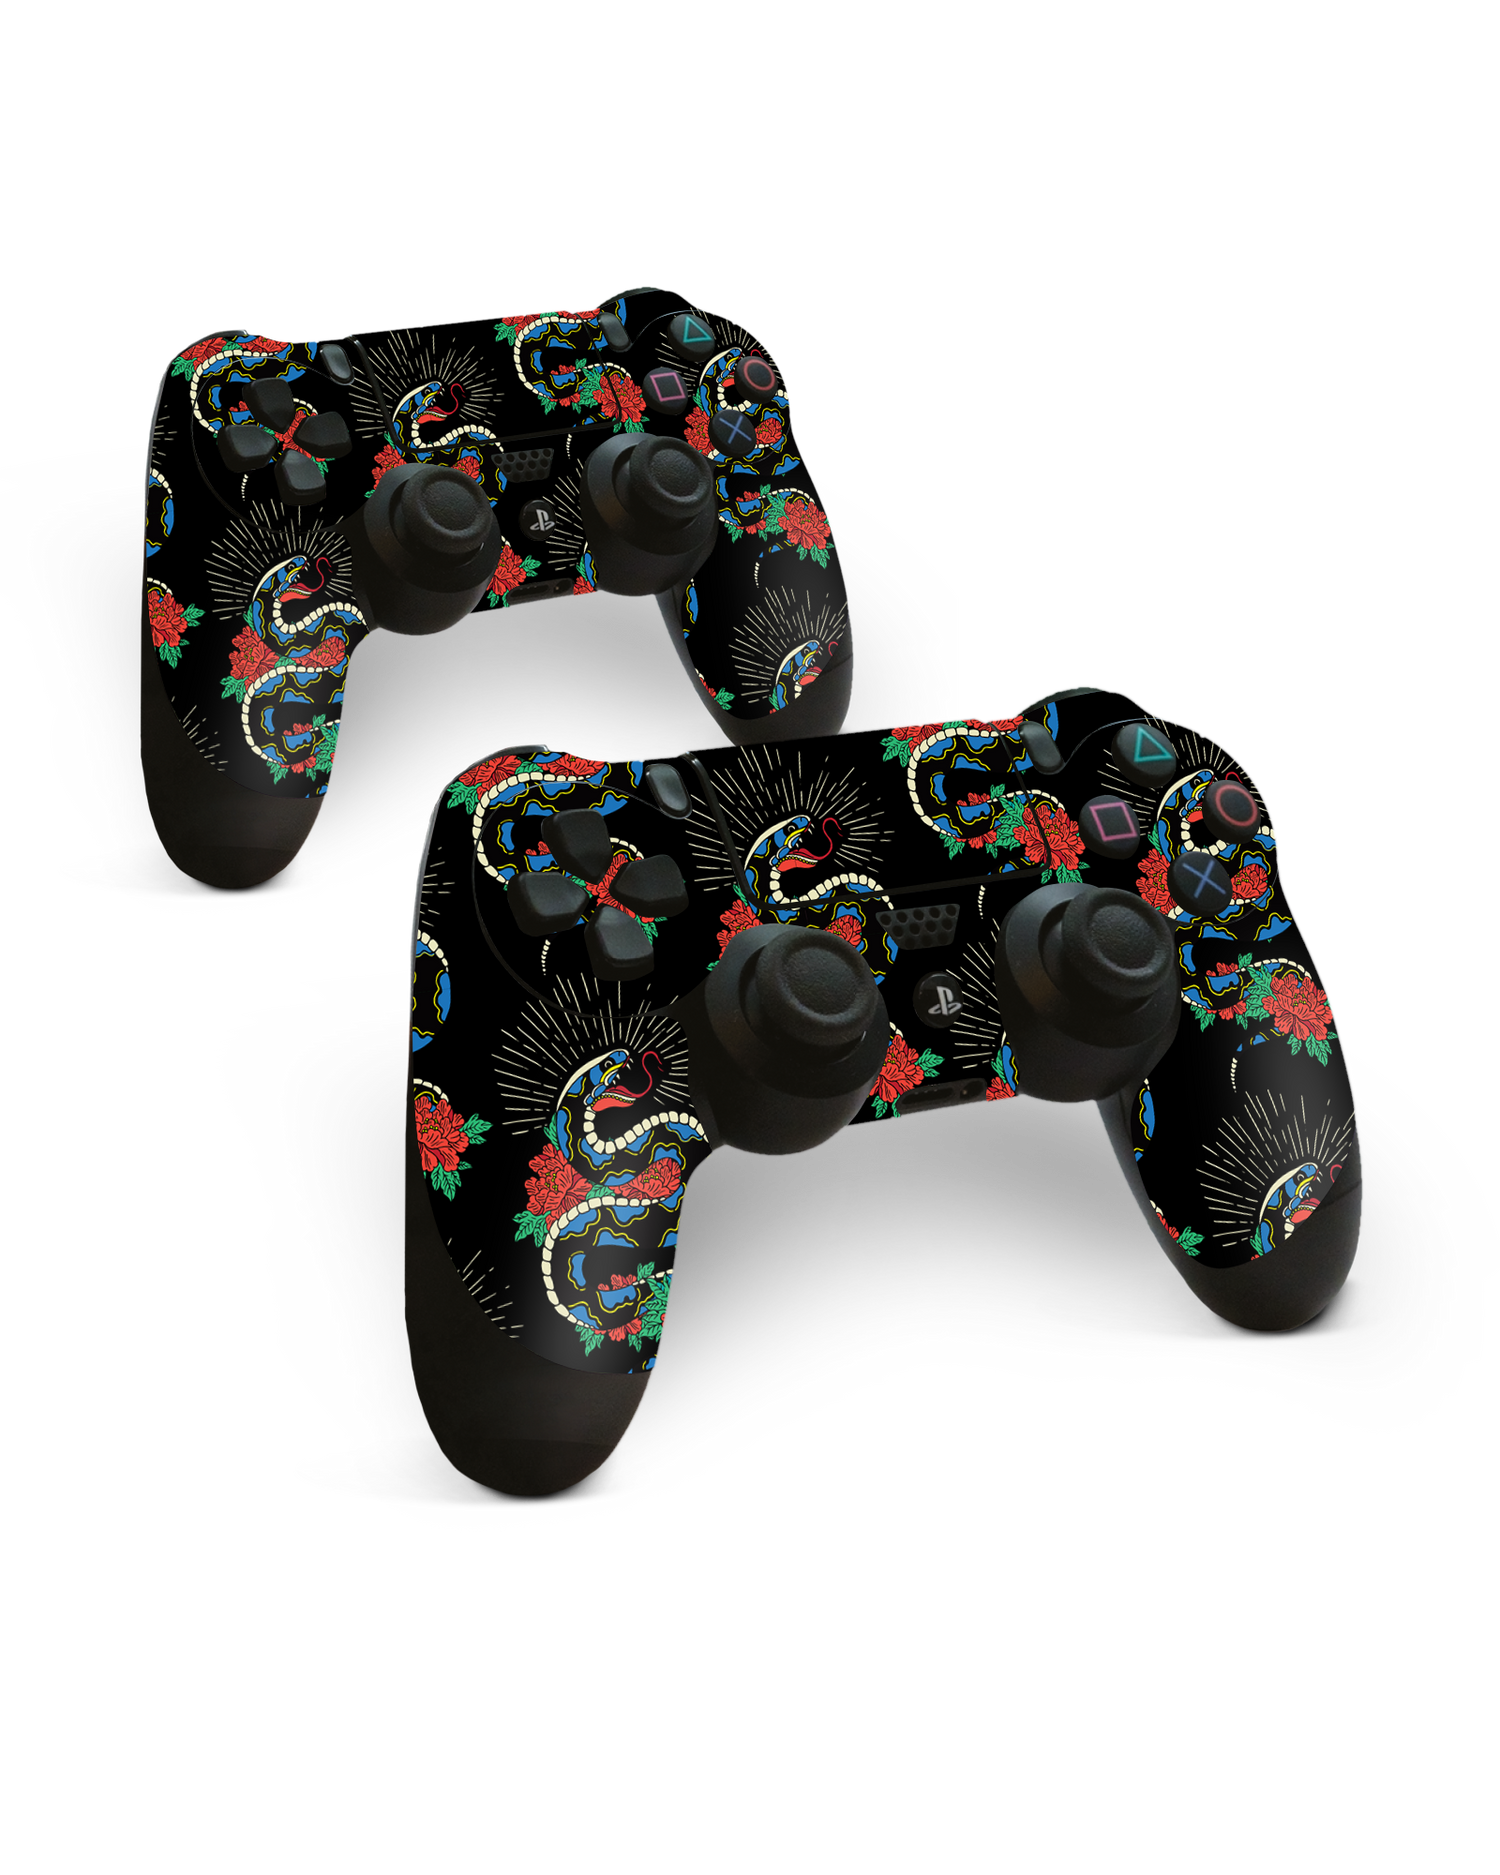 Repeating Snakes 2 Console Skin for Sony PlayStation 4 Controller: Side View